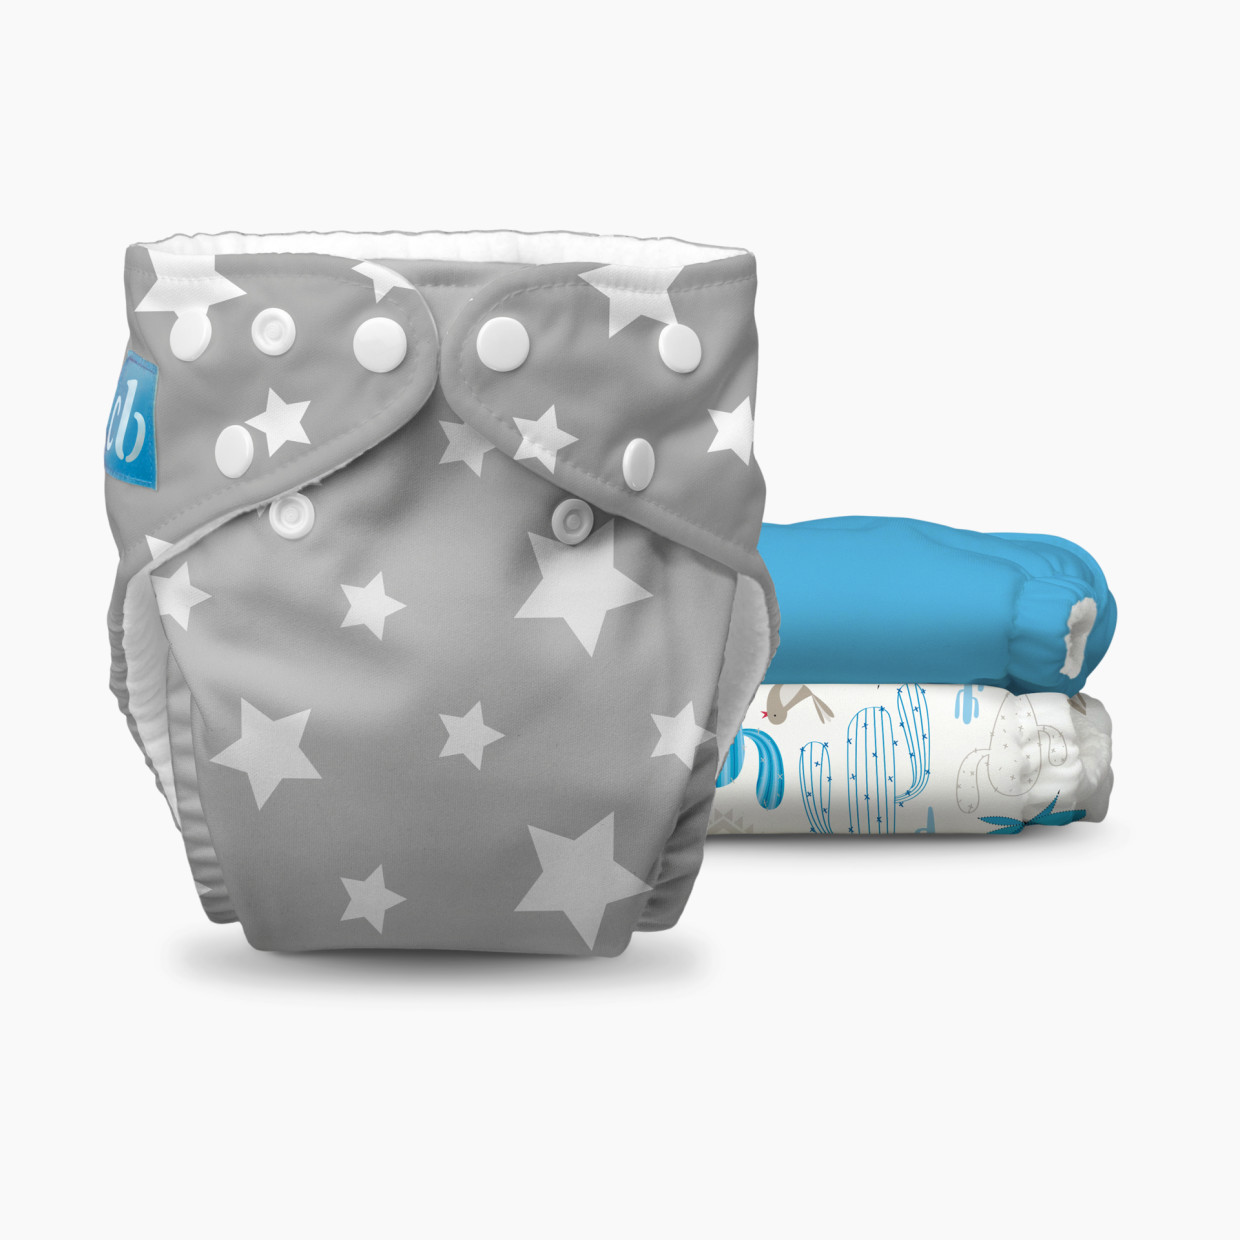 Charlie Banana Reusable Cloth Diaper (3 Diapers and 3 Reusable Inserts) - Under The Stars, One Size.